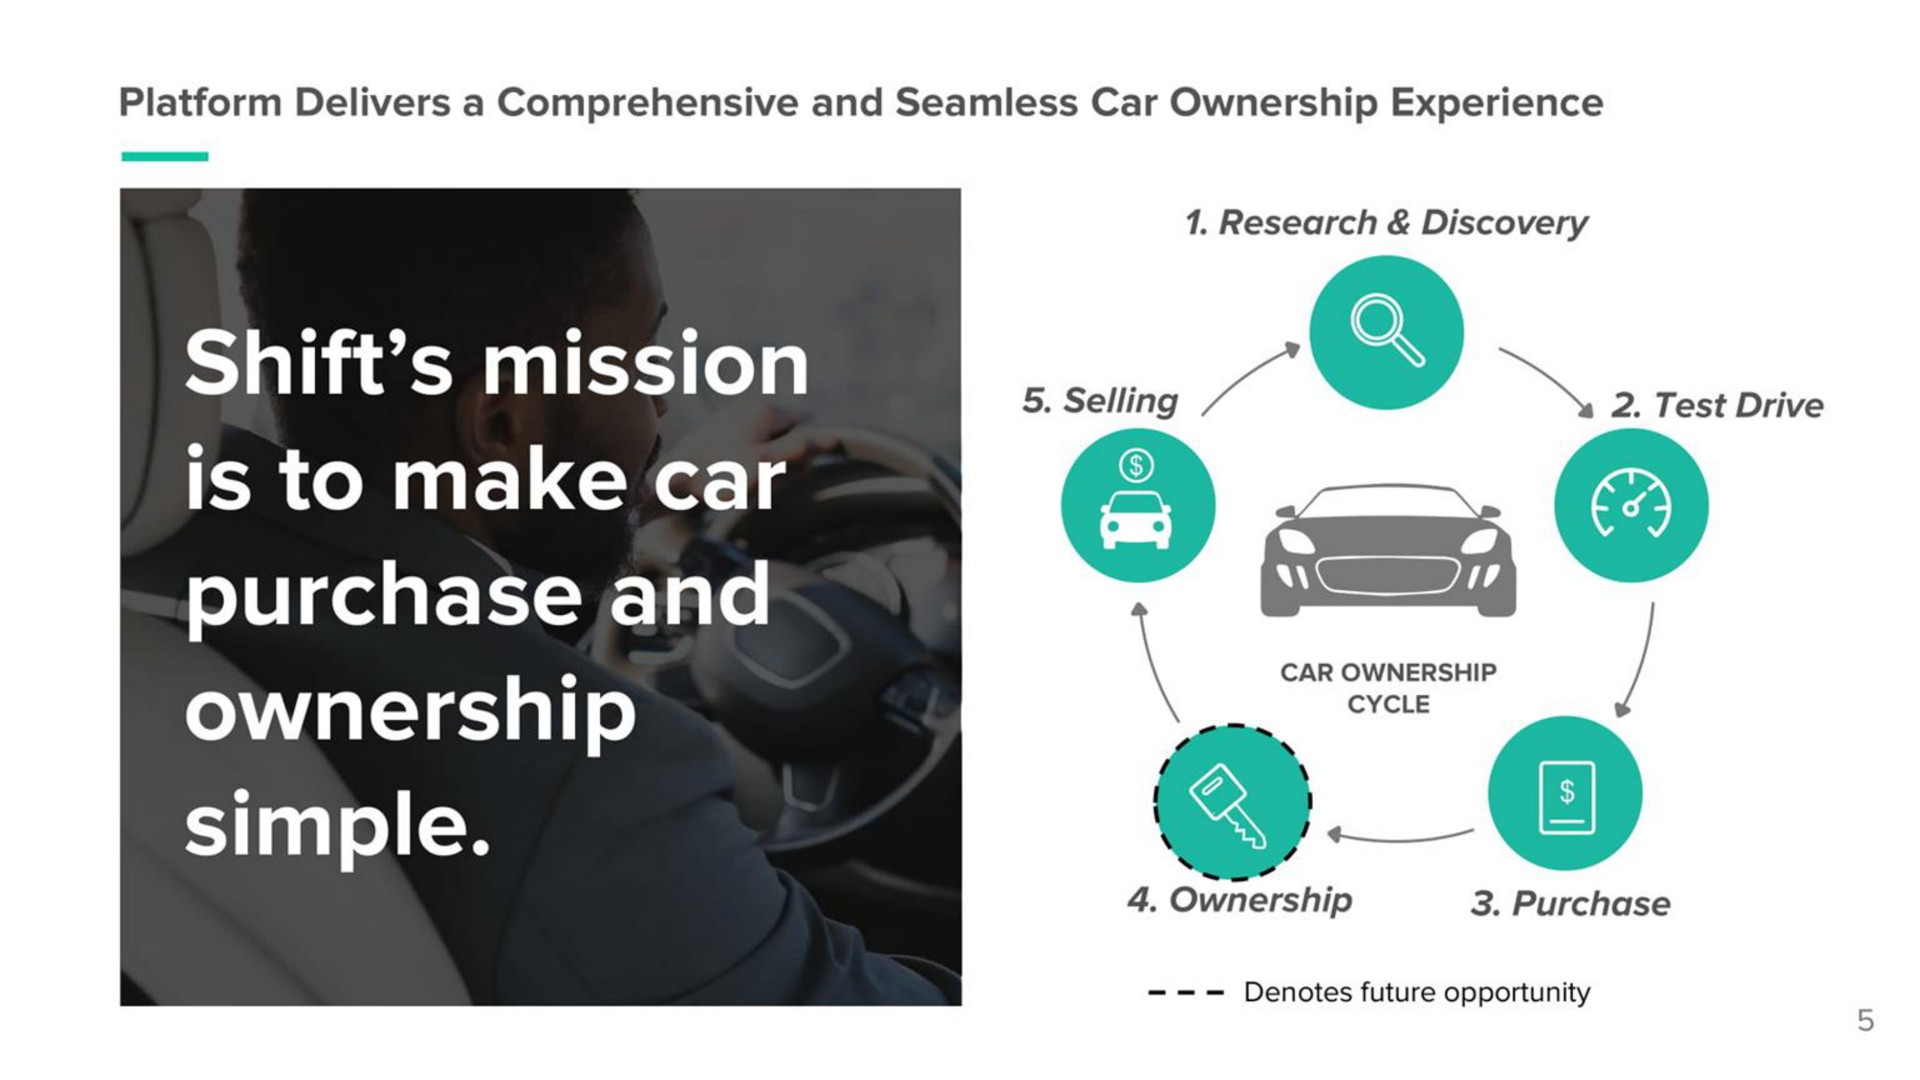 platform delivers a comprehensive and seamless car ownership experience a rect drive lamas is to make car purchase and ownership | Shift